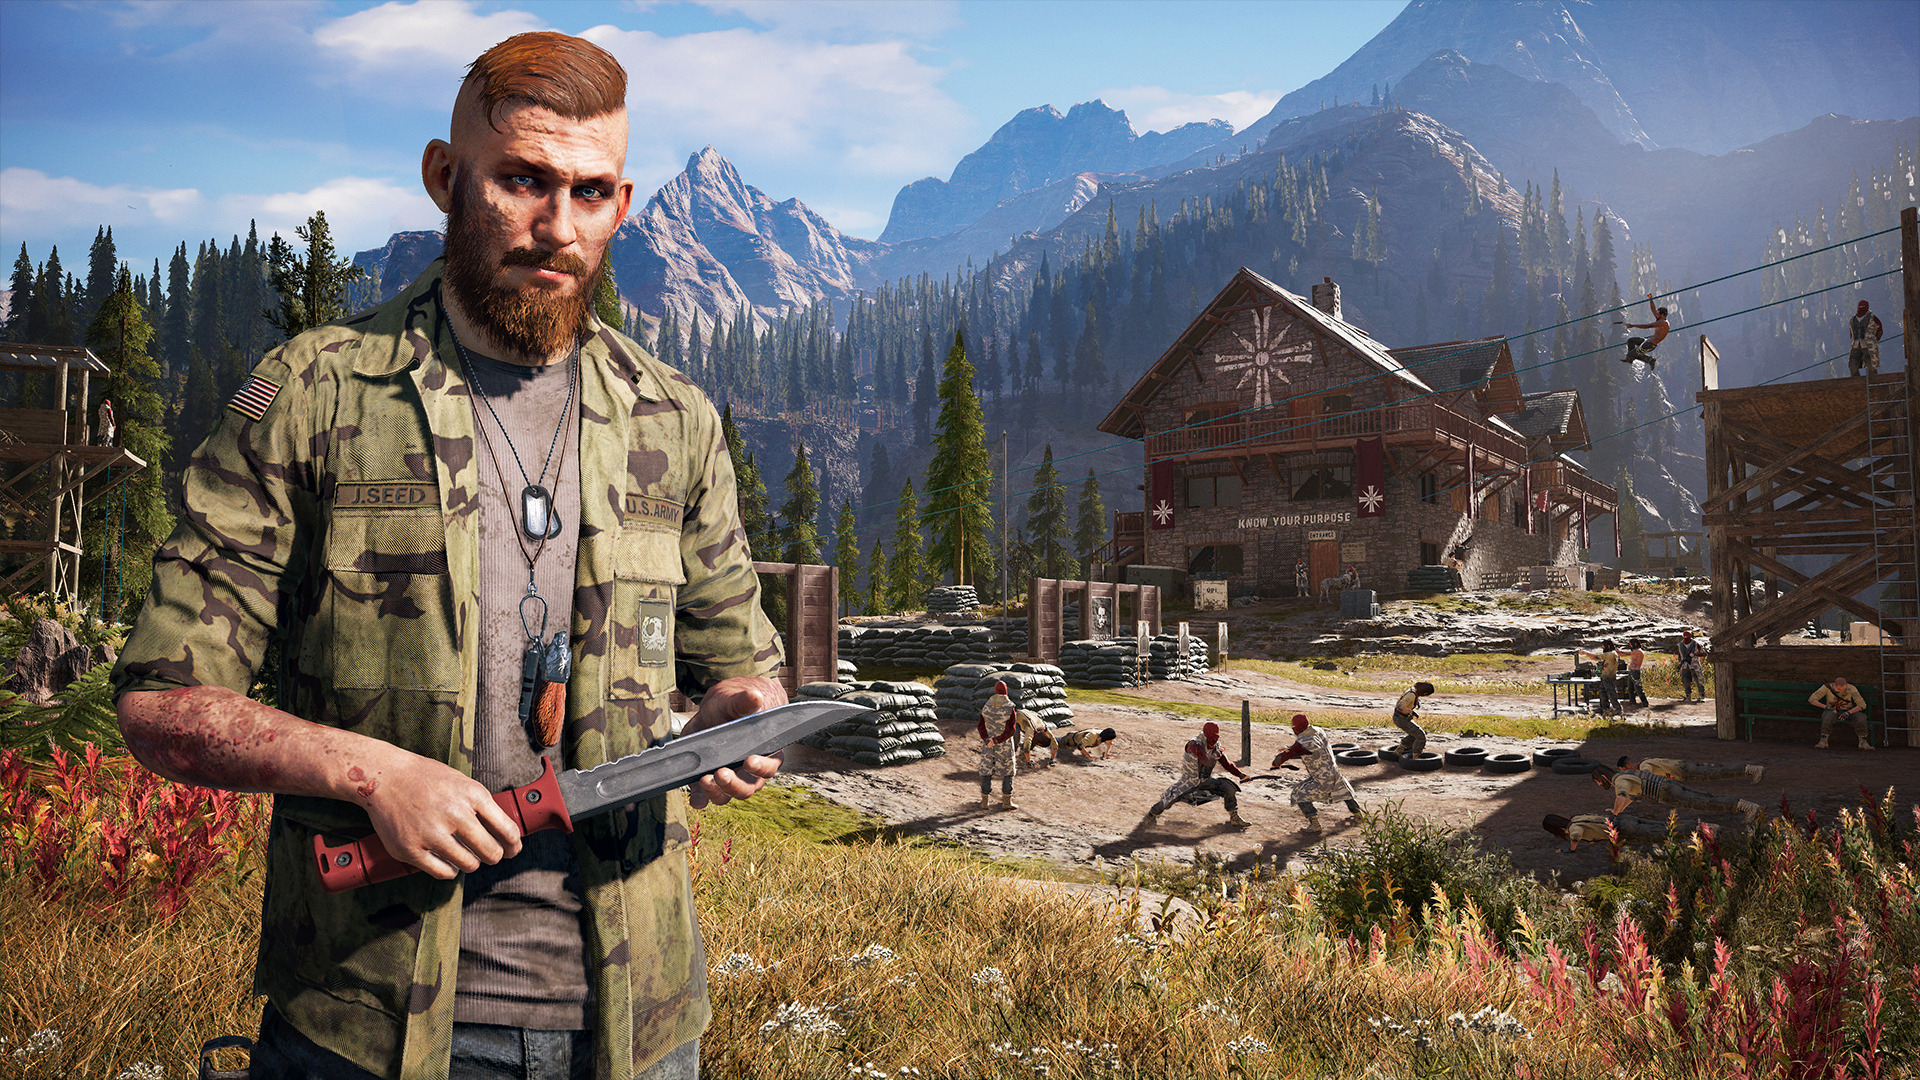 Far Cry 5 Allows You To Build Crazy Levels With Items From Assassin's Creed  And Watch Dogs - GameSpot